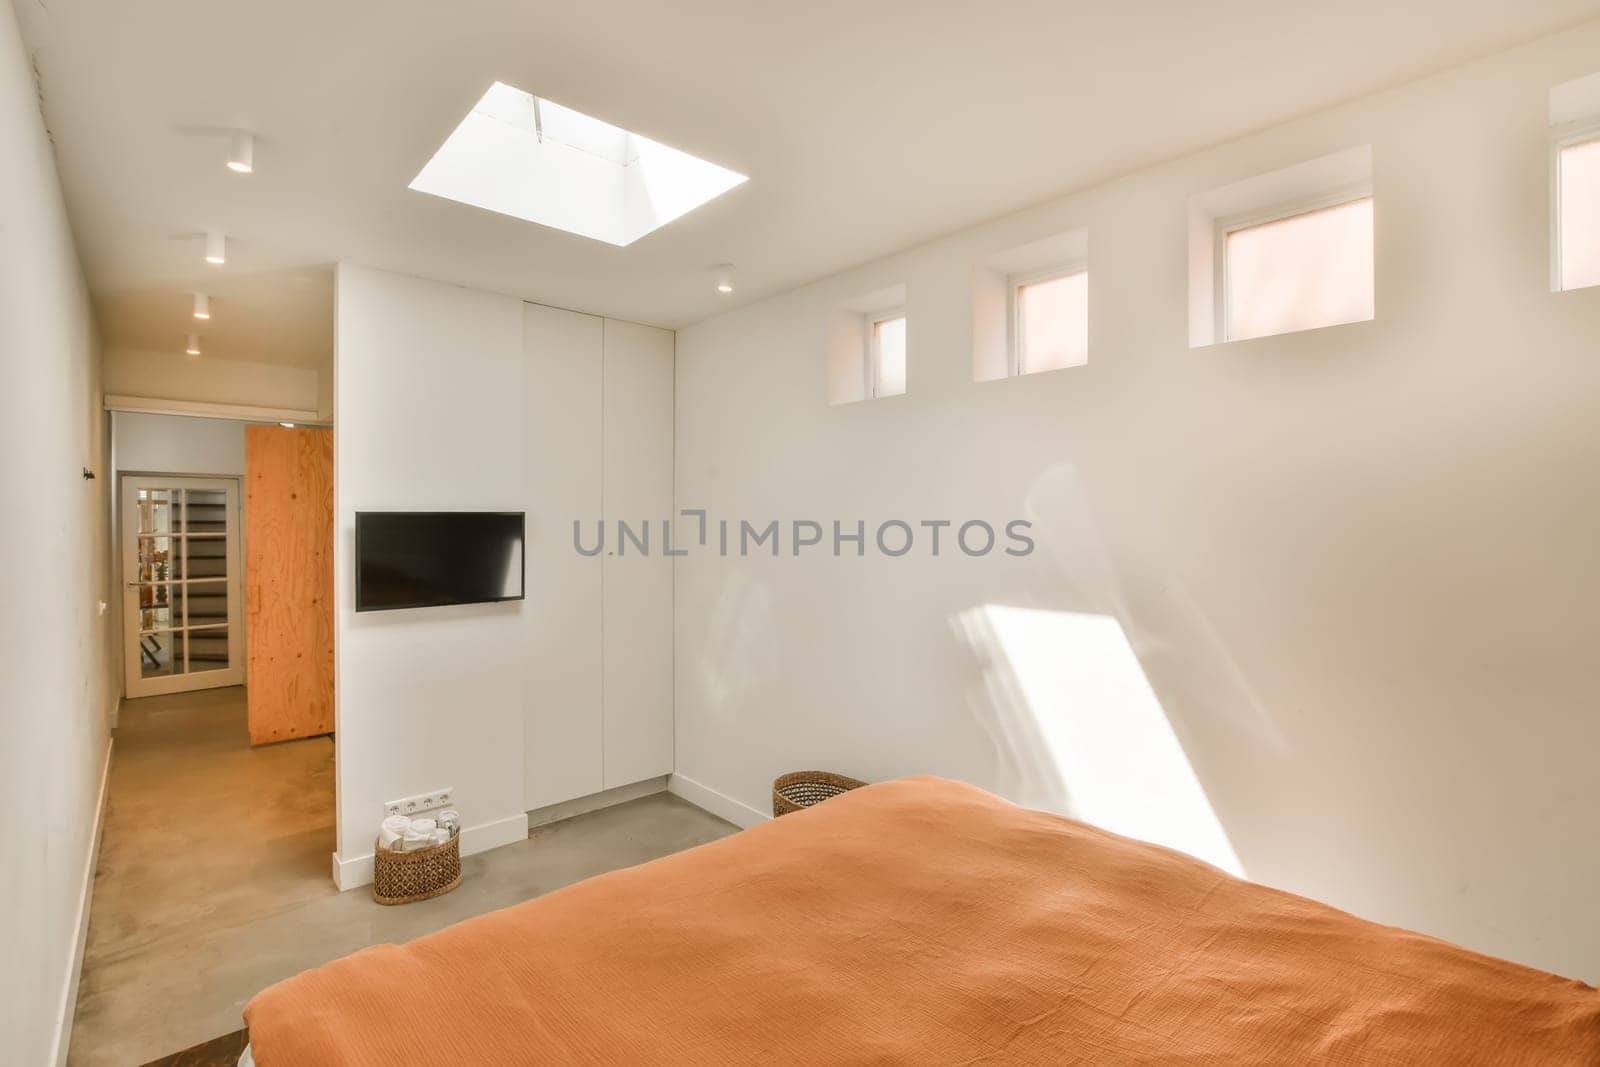 a bedroom with an orange comforter on the bed and a flat screen tv mounted in the corner of the room